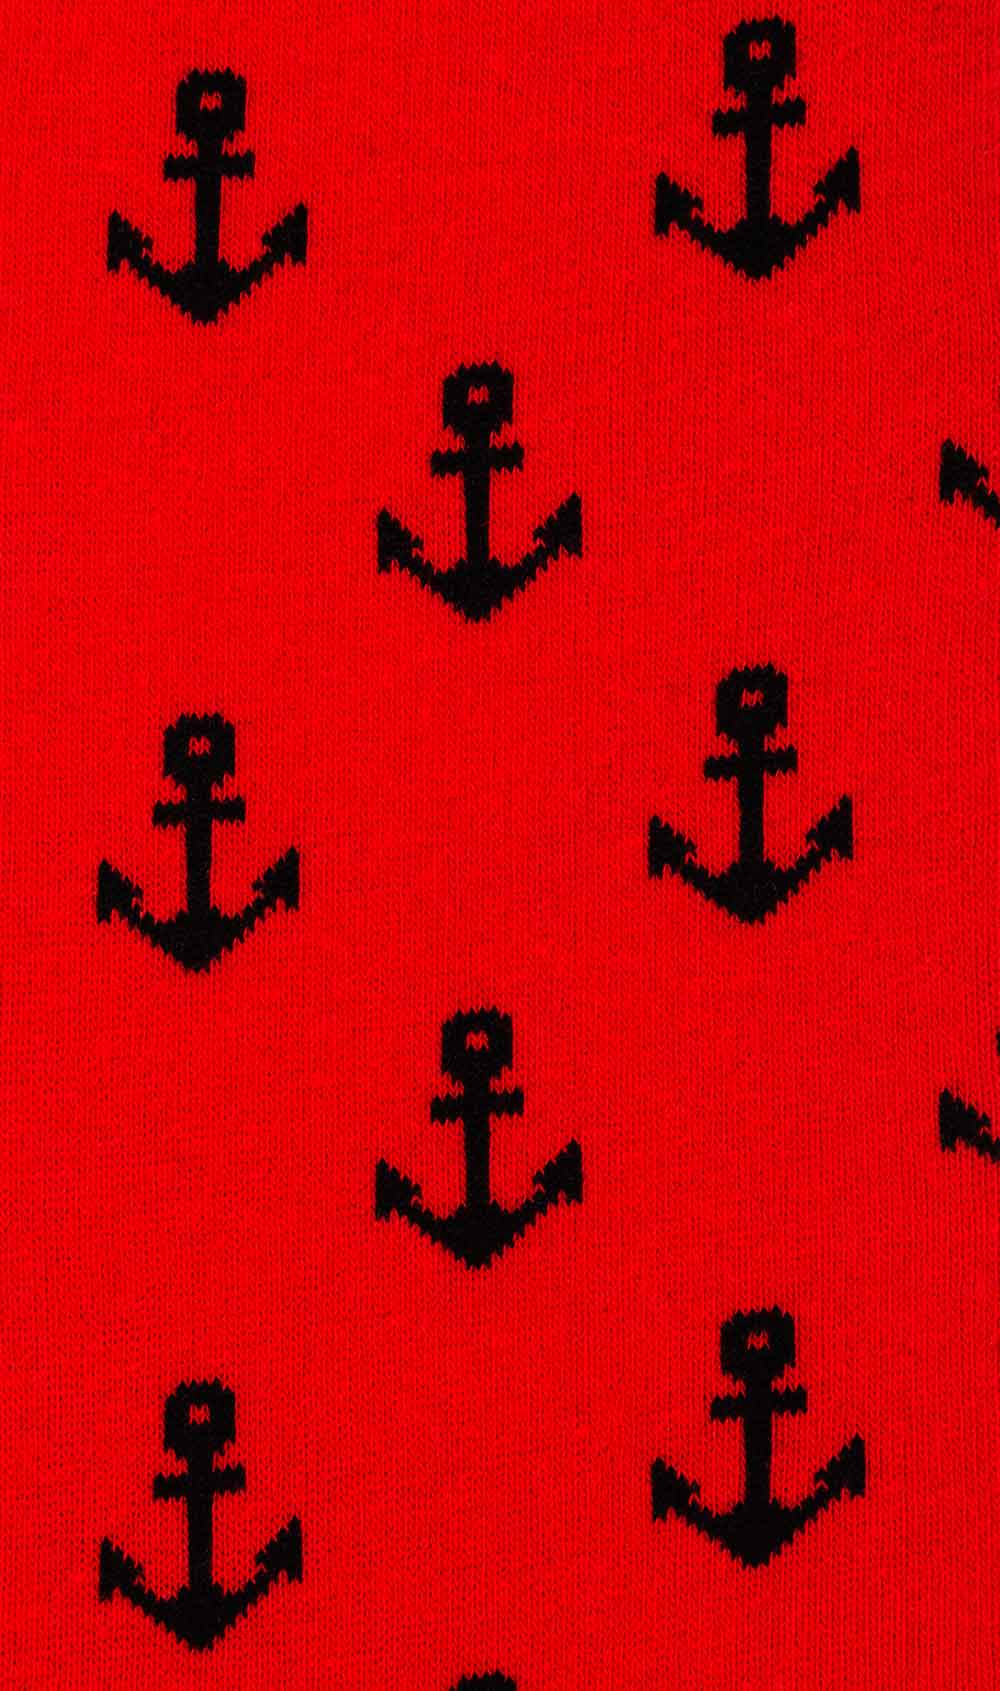 Pirate Red Anchor Socks Fabric